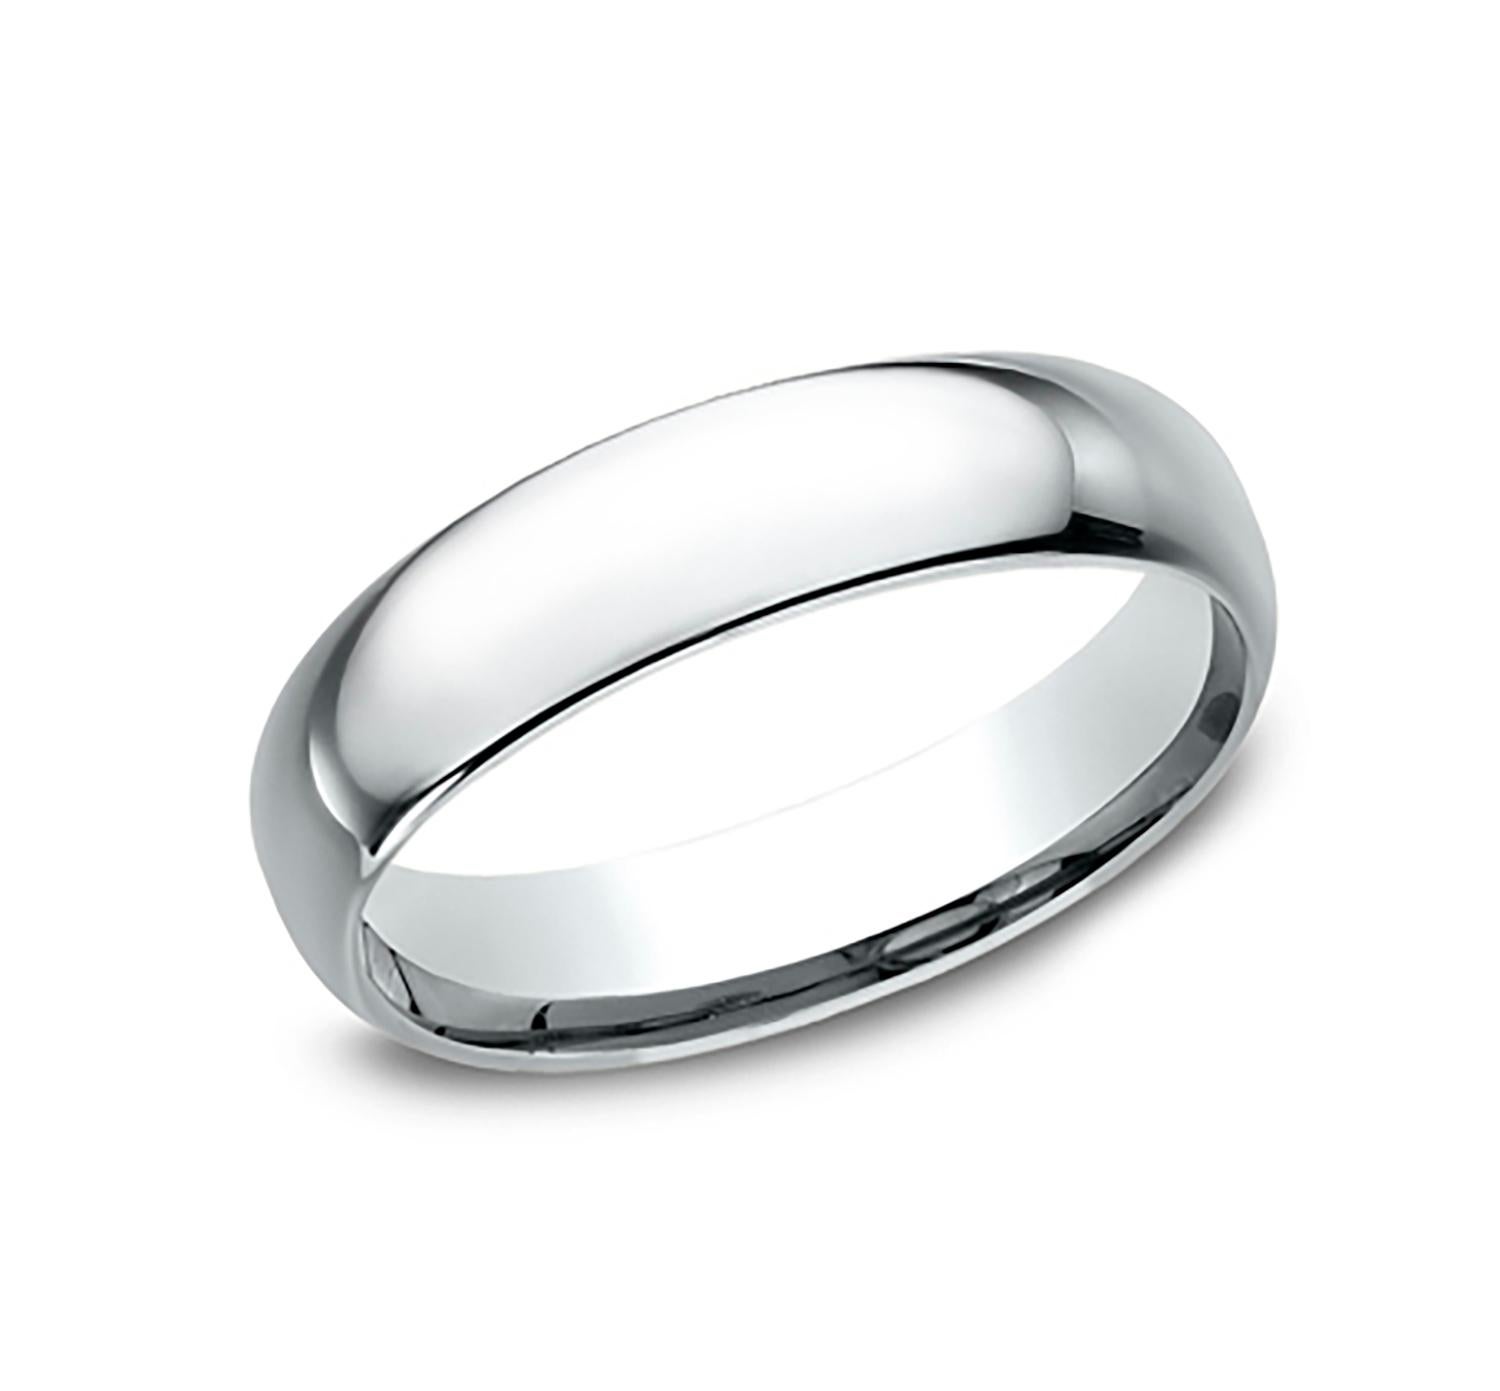 Benchmark wedding band in polished platinum finish. Width 5mm, high dome comfort fit. Custom engraving and finishing available. Size 8 US and resizable upon request. Available in 1/4, 1/2, and 3/4 sizes, for more information please message us on